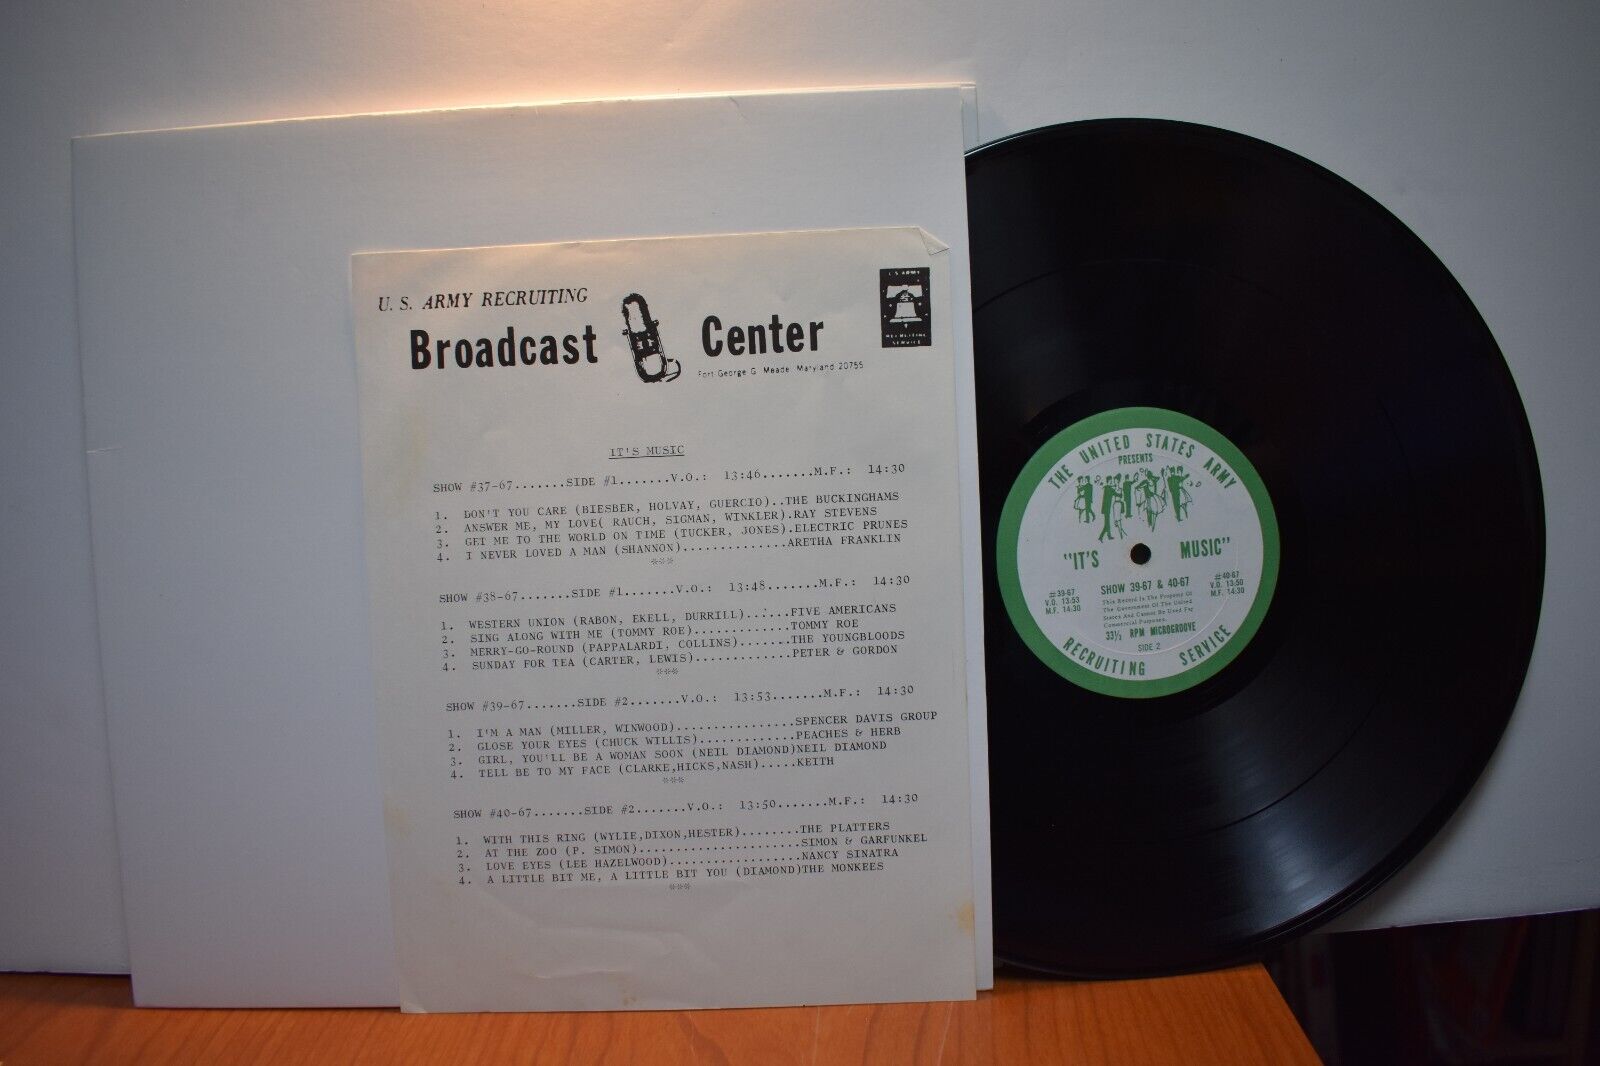 U.S. Army Recruiting Broadcast Center It’s Music LP SHOWS #37-67 through #40-67